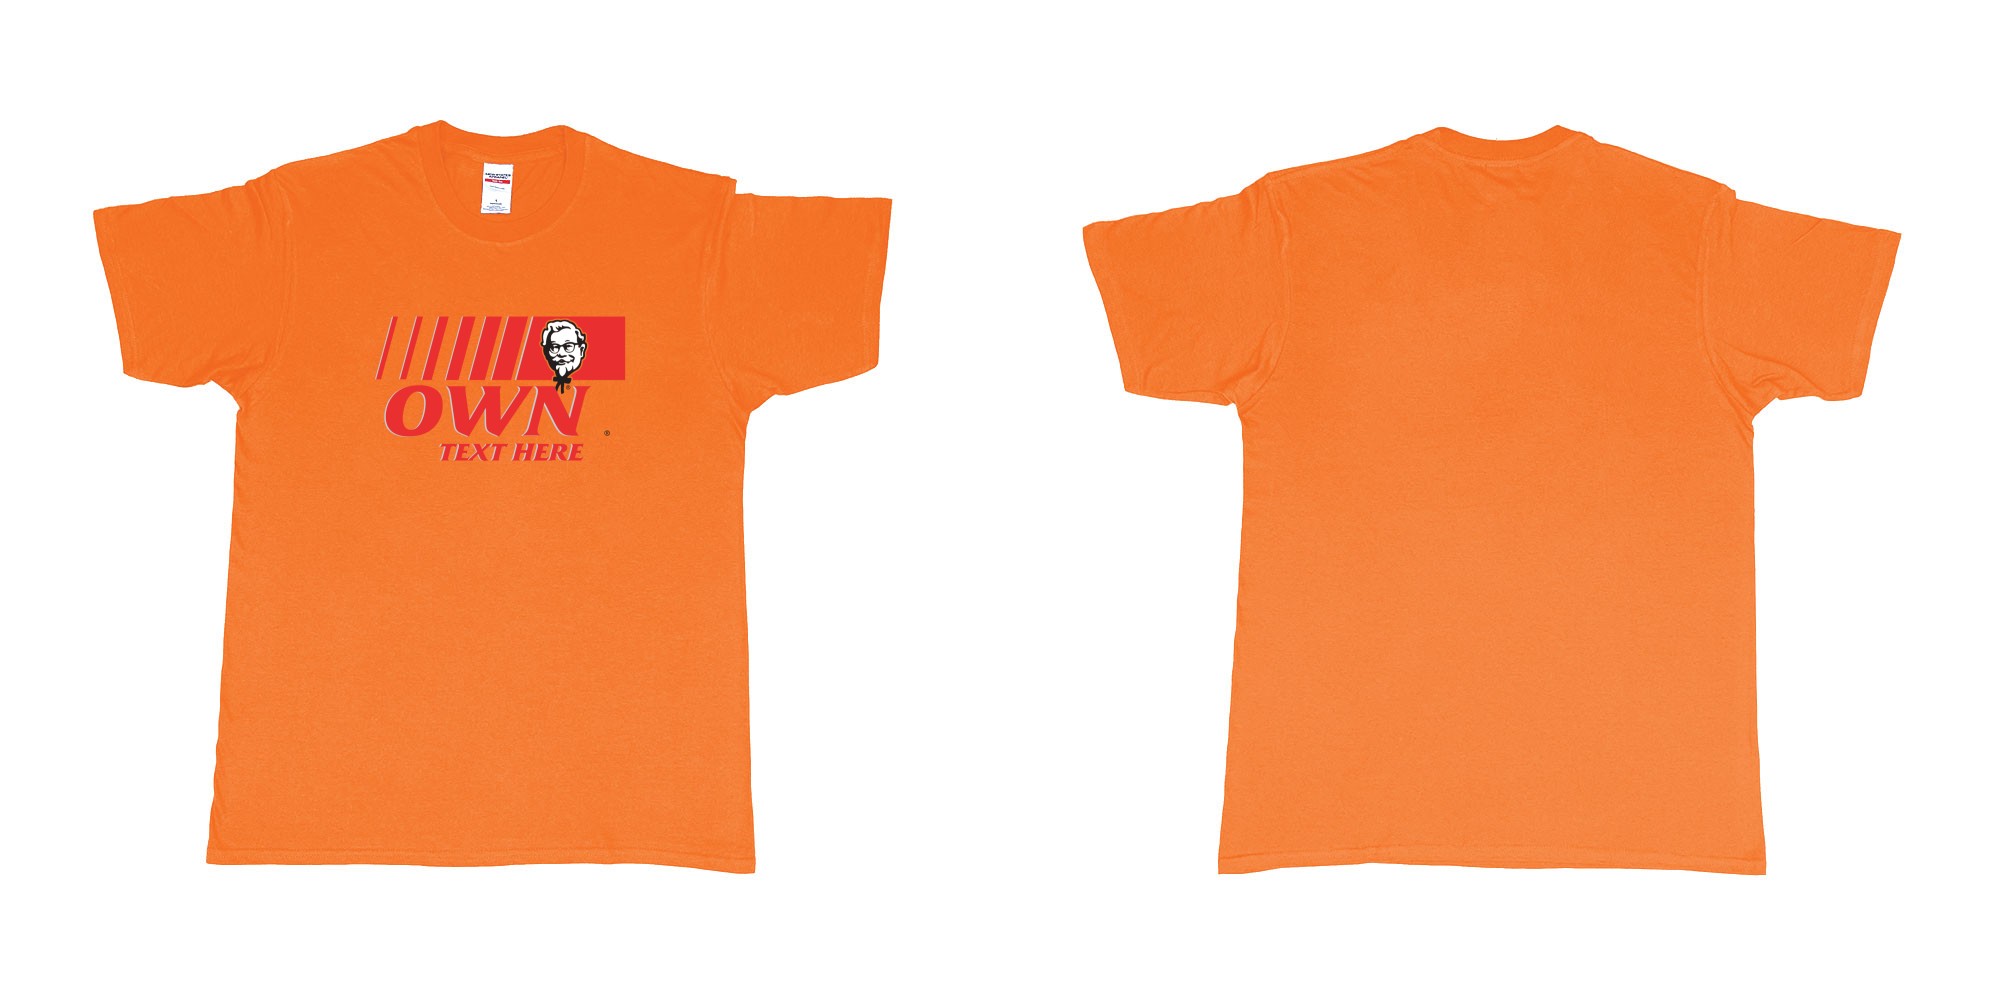 Custom tshirt design KFC in fabric color orange choice your own text made in Bali by The Pirate Way